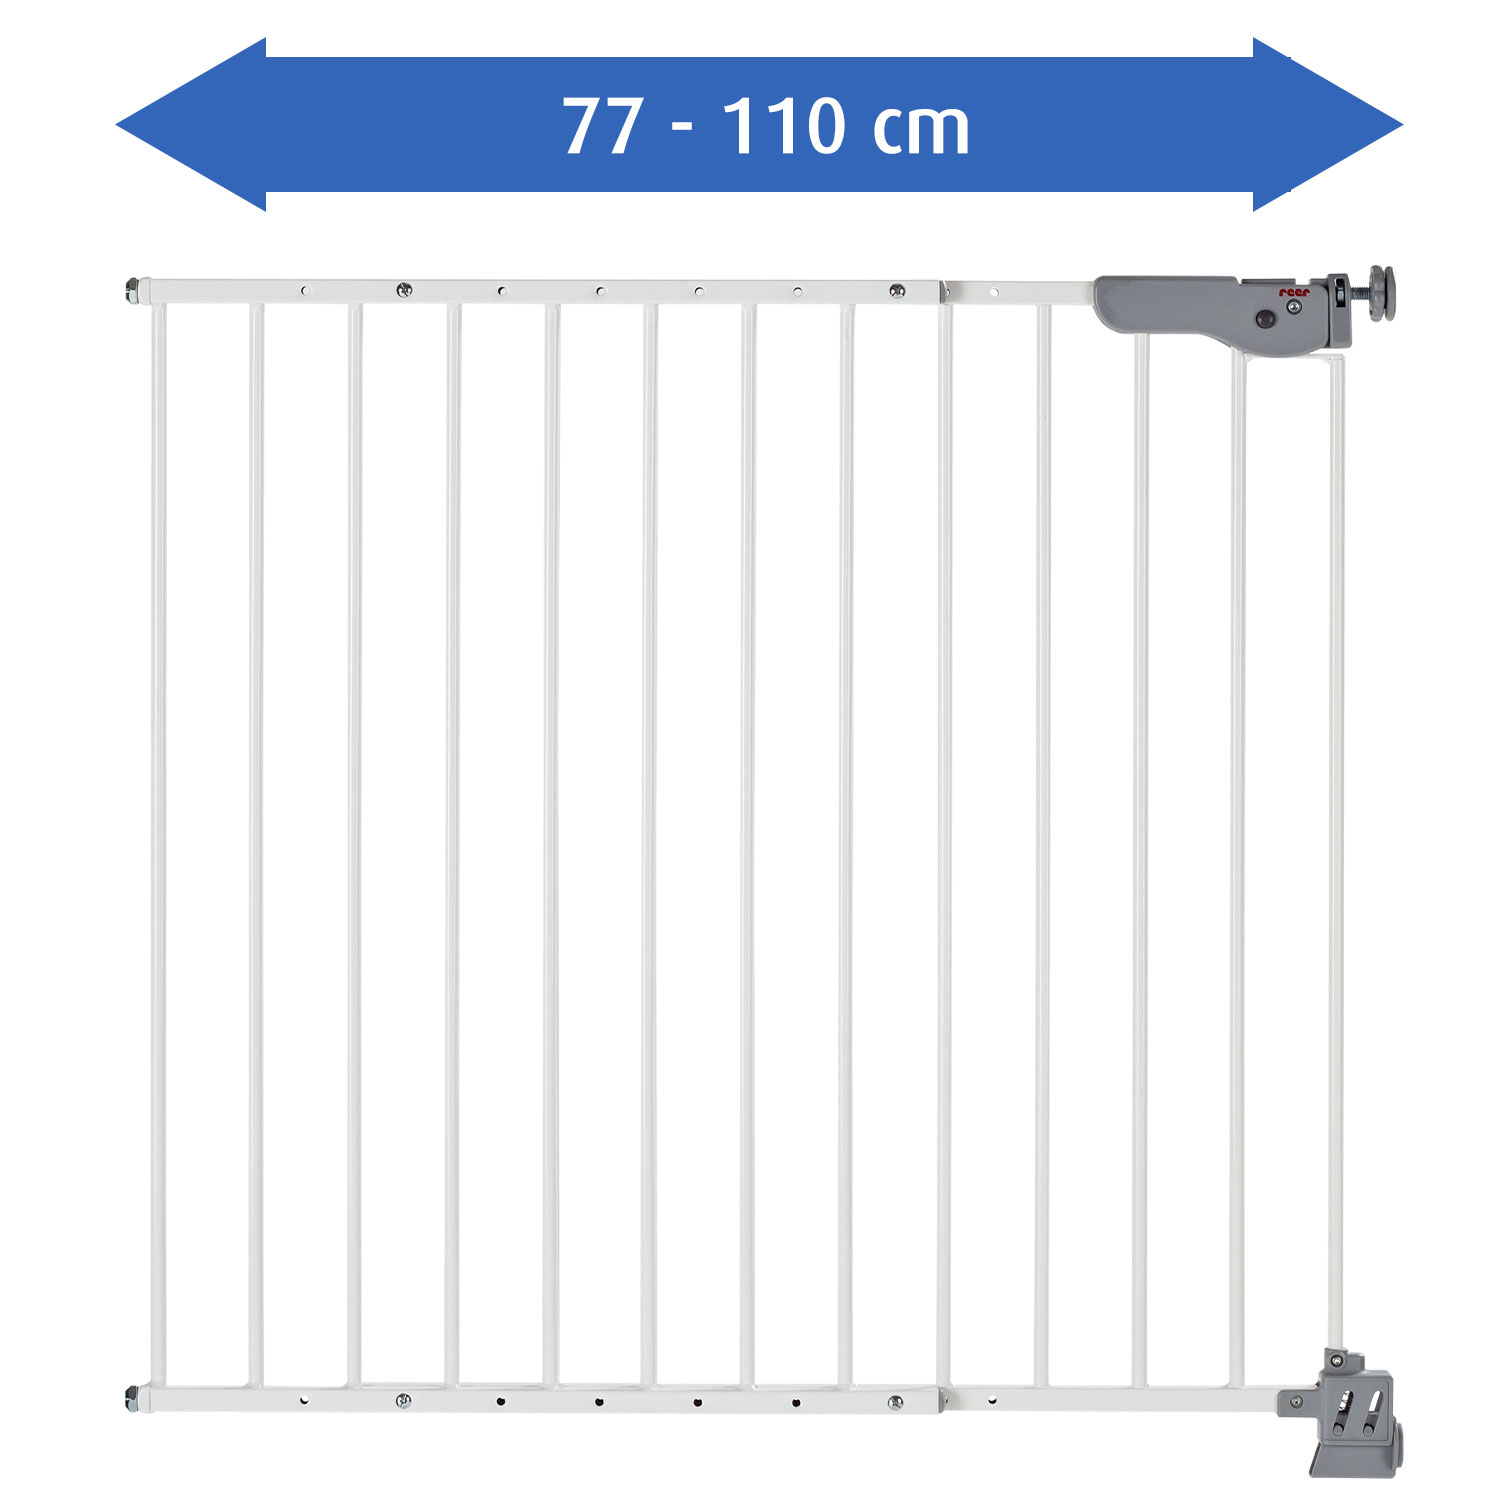 Advanced Twin fix gate for gateways from 77 - 110 cm